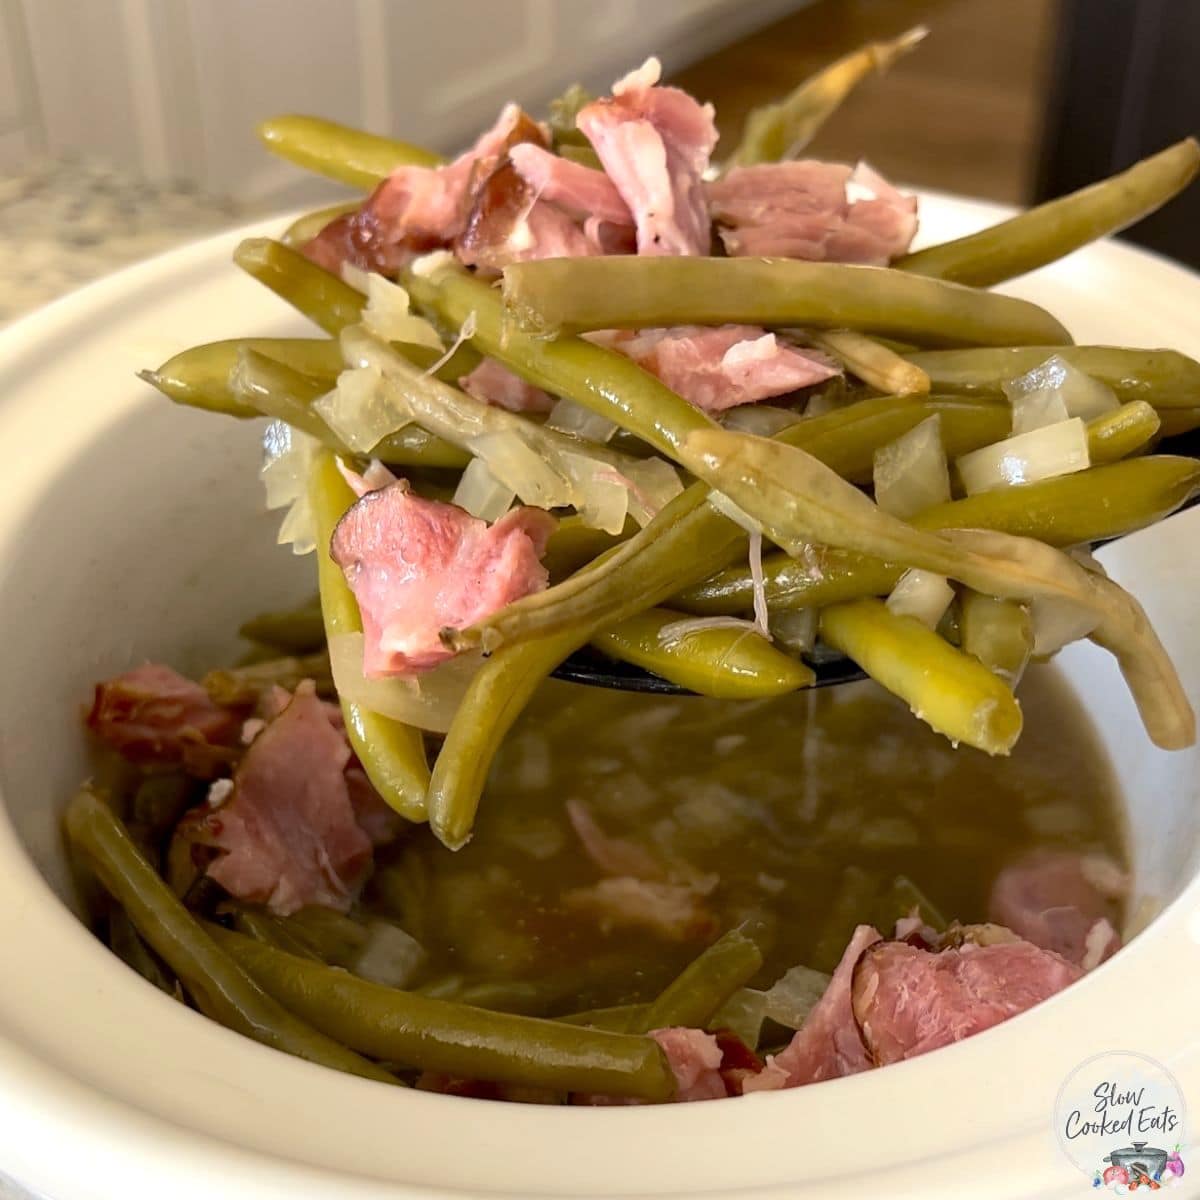 Draining the liquid from the crockpot green beans and ham.